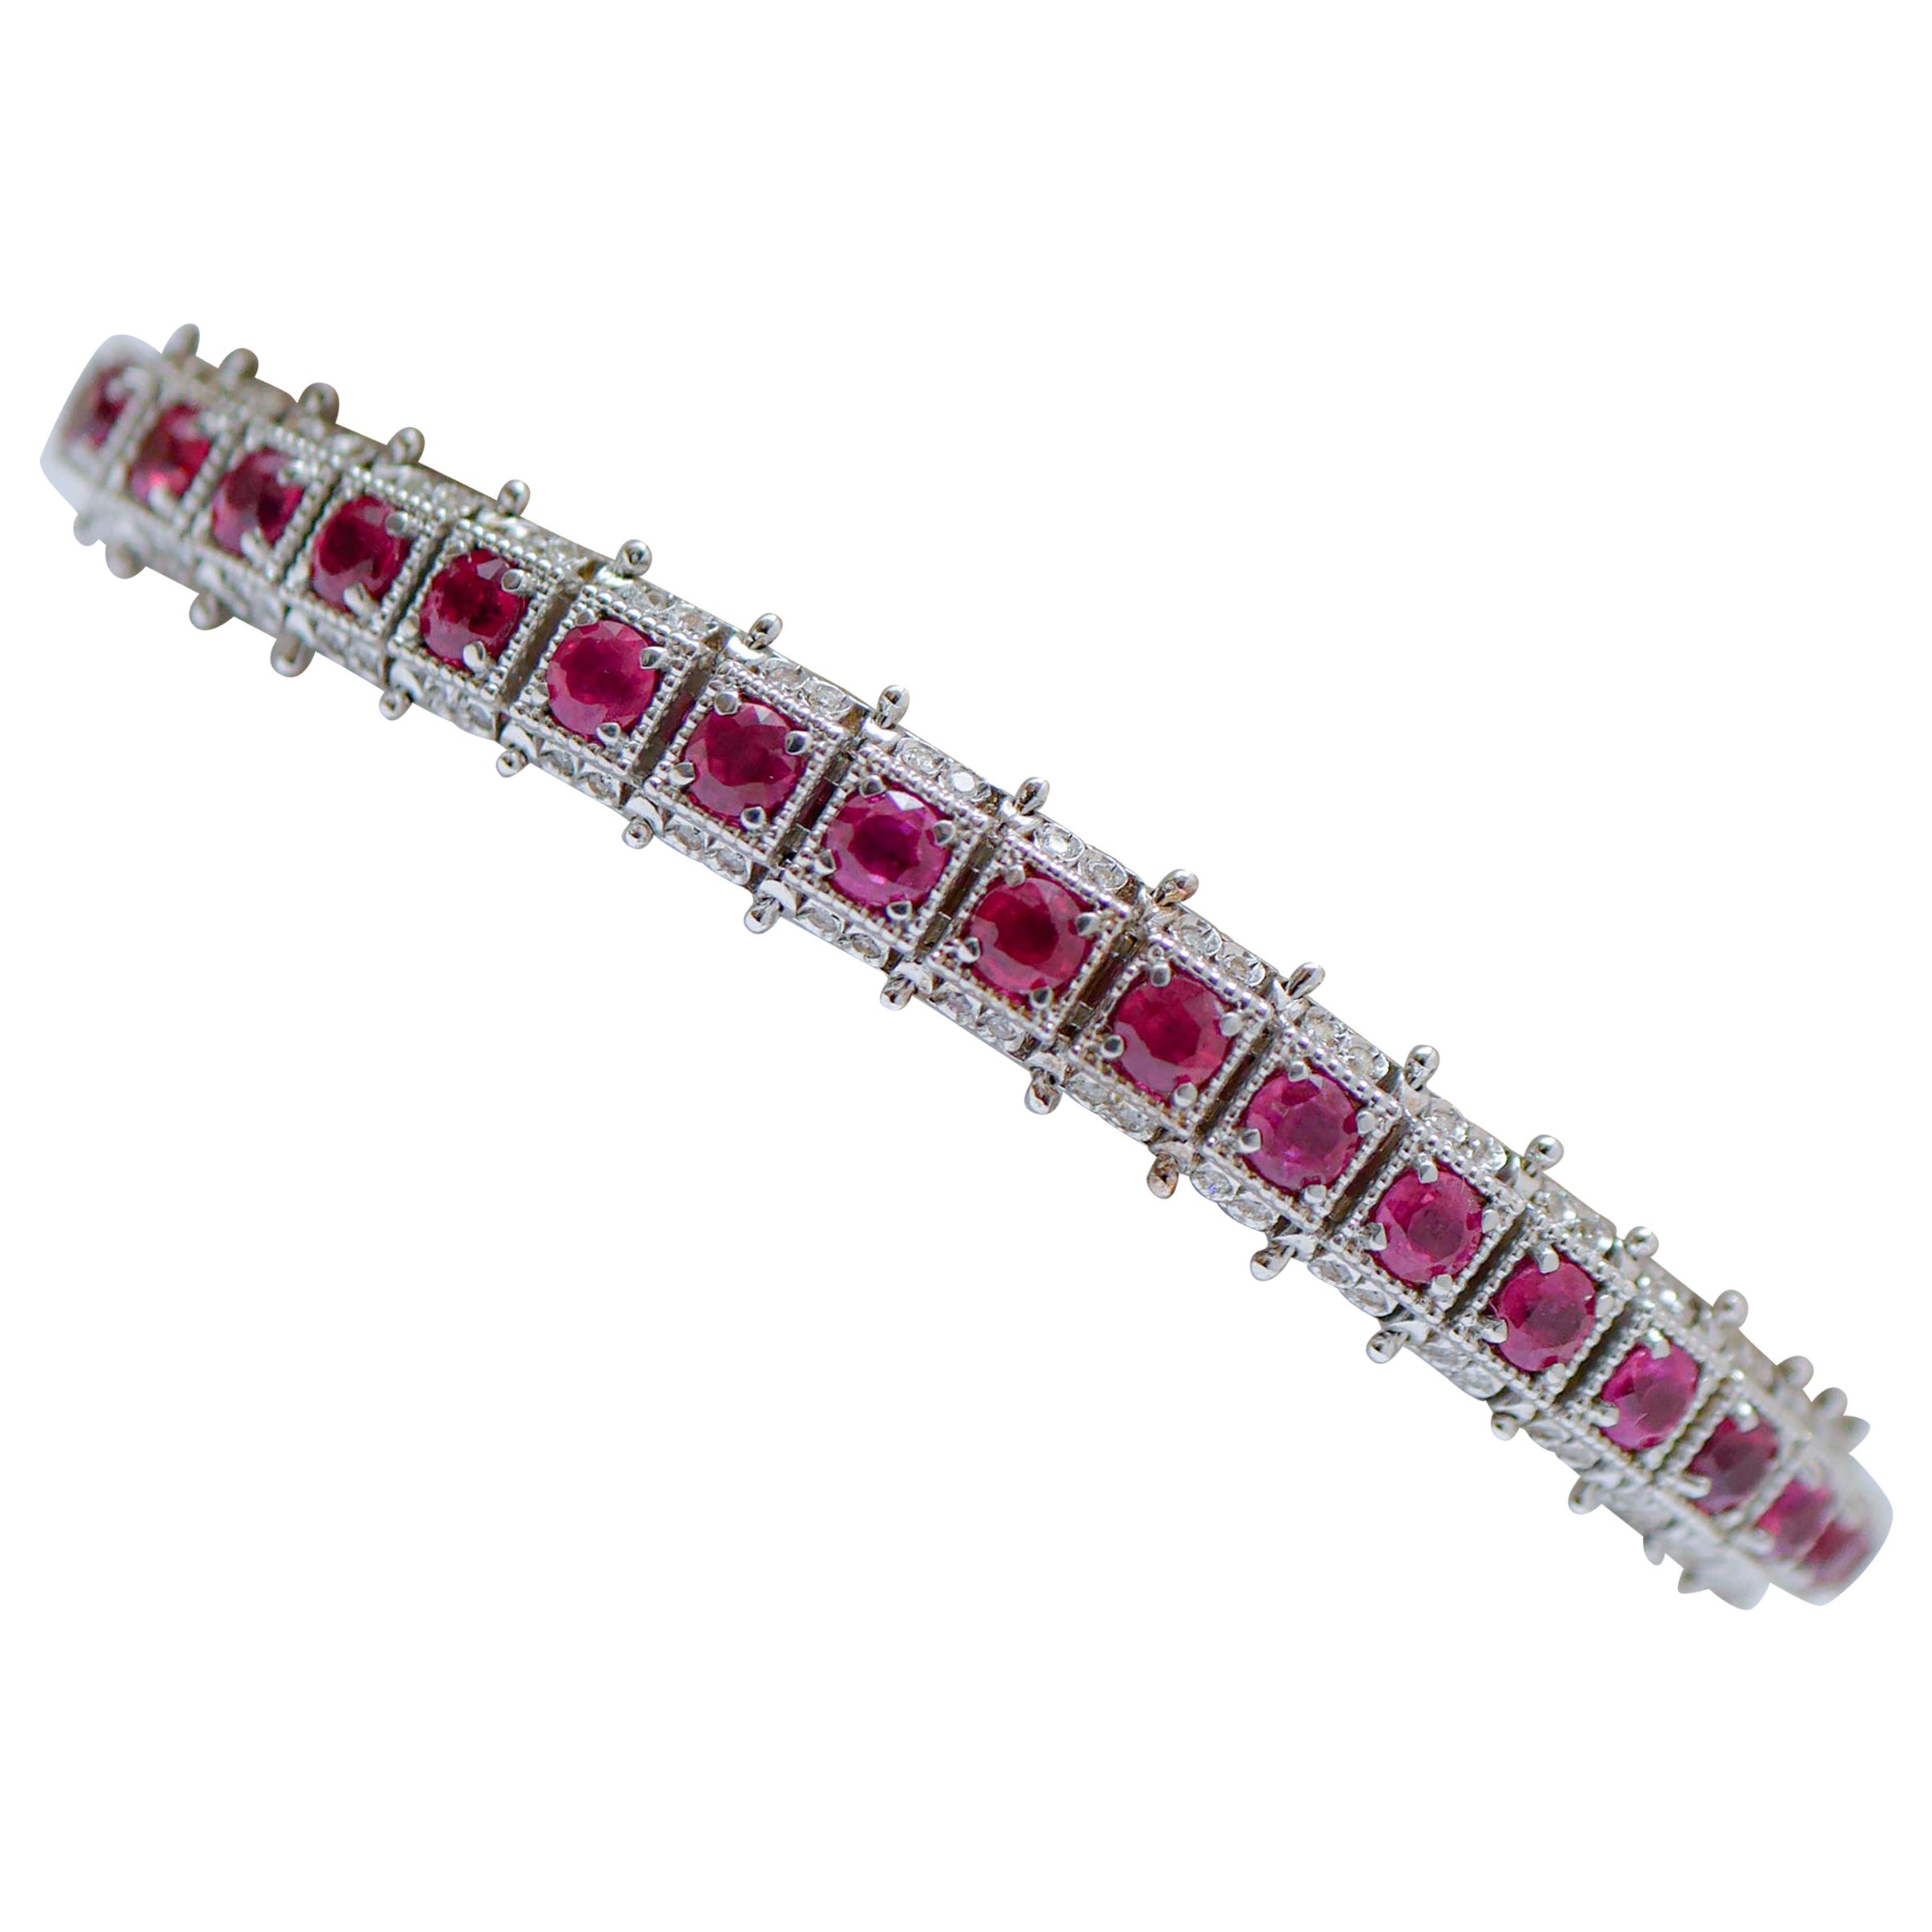 Rubies, Diamonds, Rose Gold and Silver Bracelet. For Sale